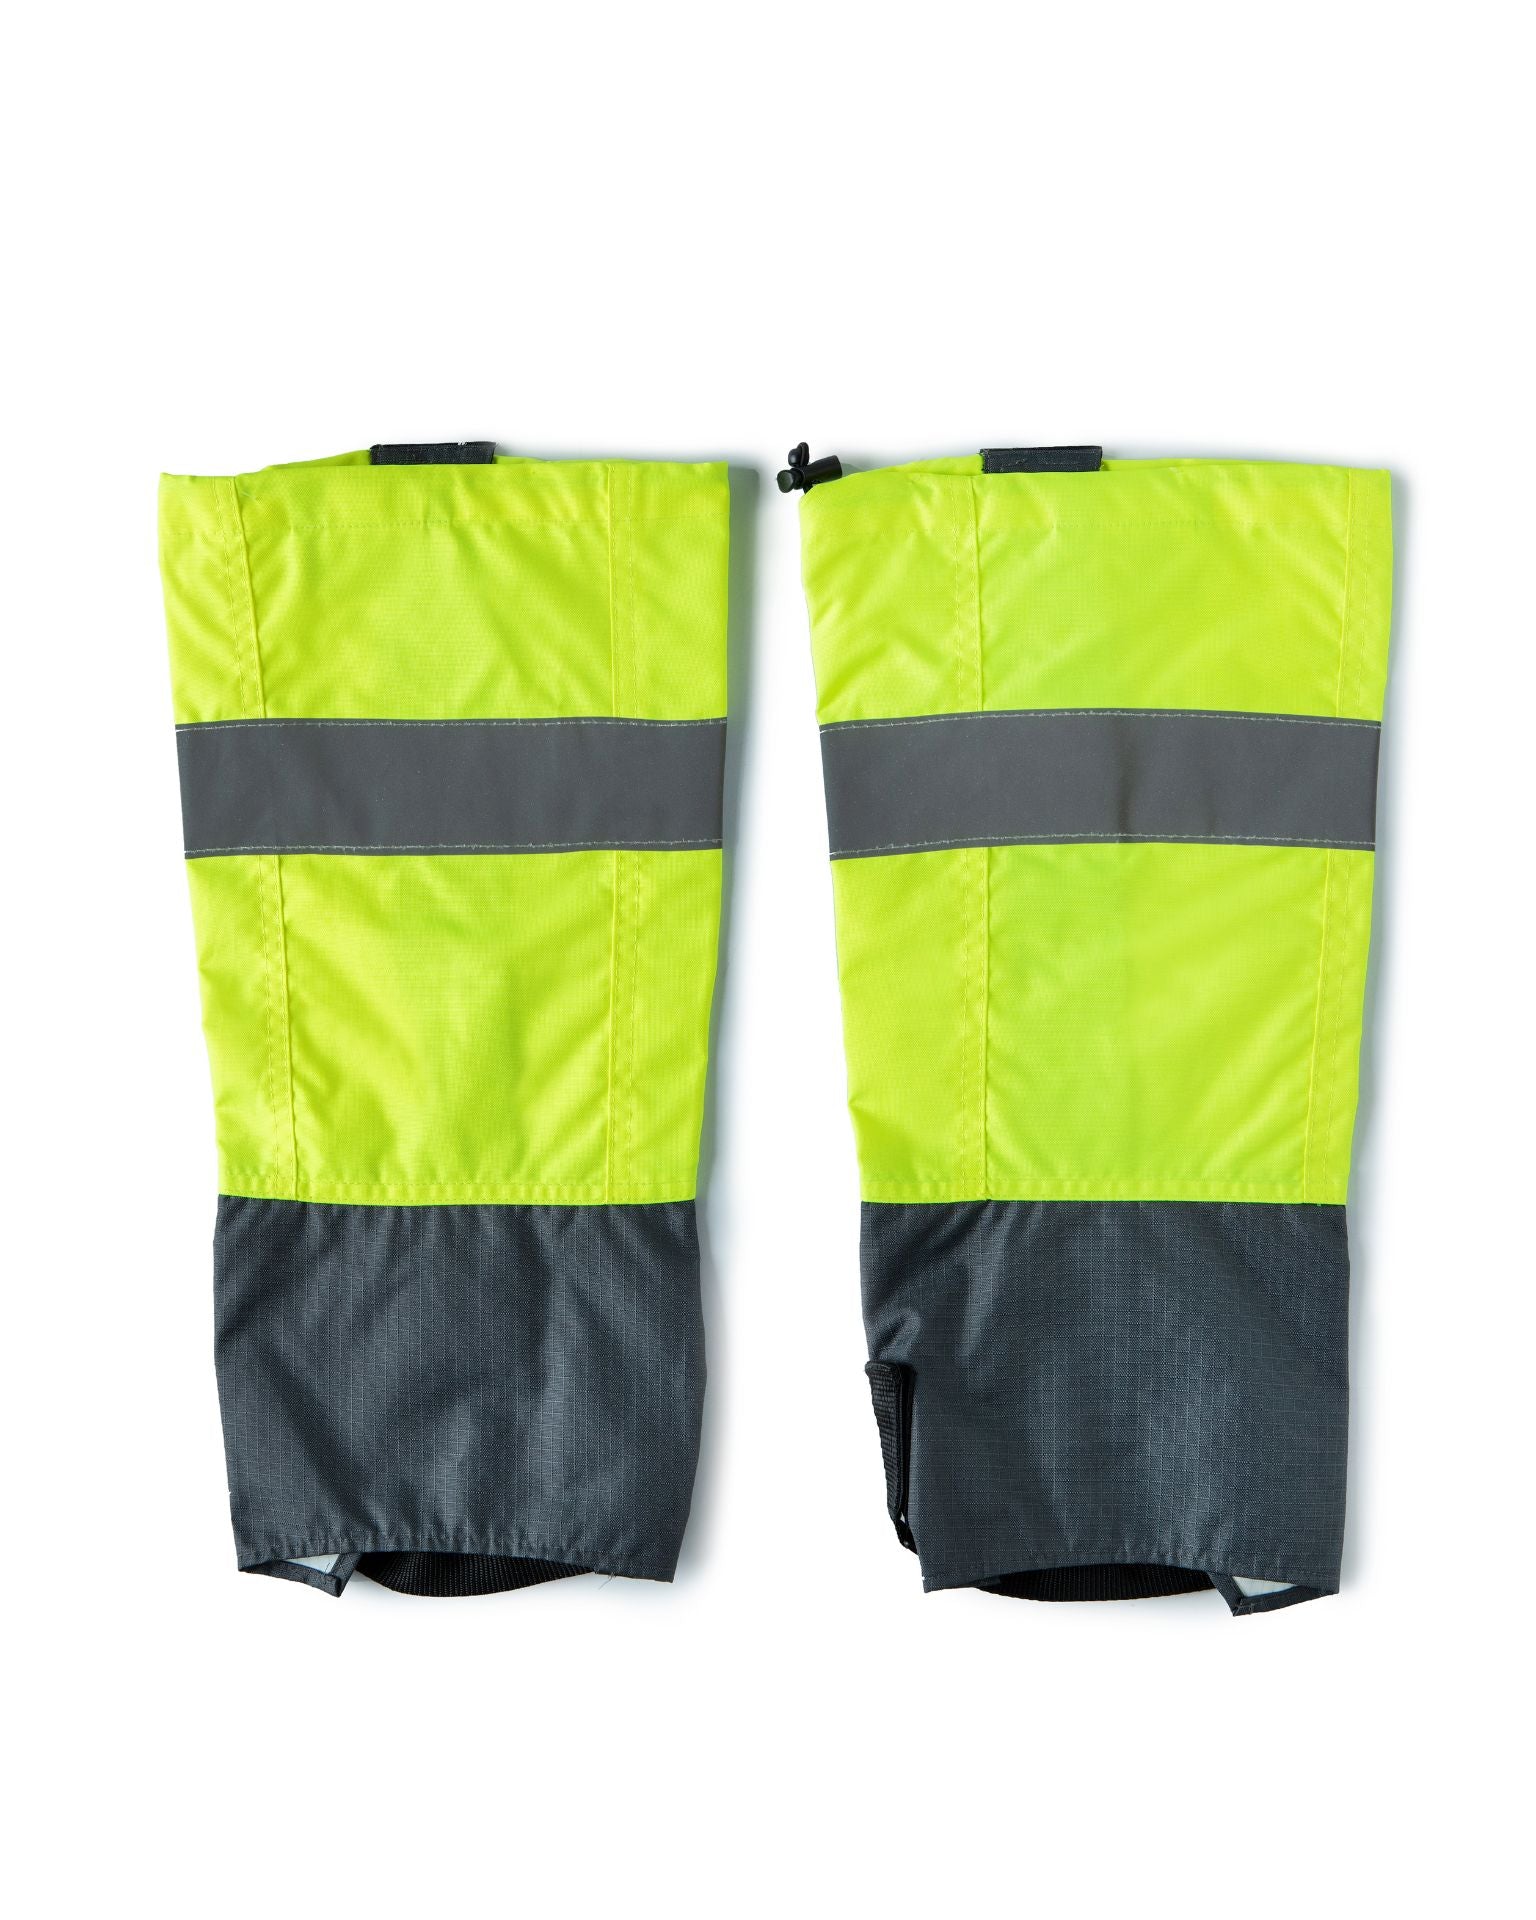 UHV888 Leg Gaiters - Protected with PERIMETER™ Insect Guard